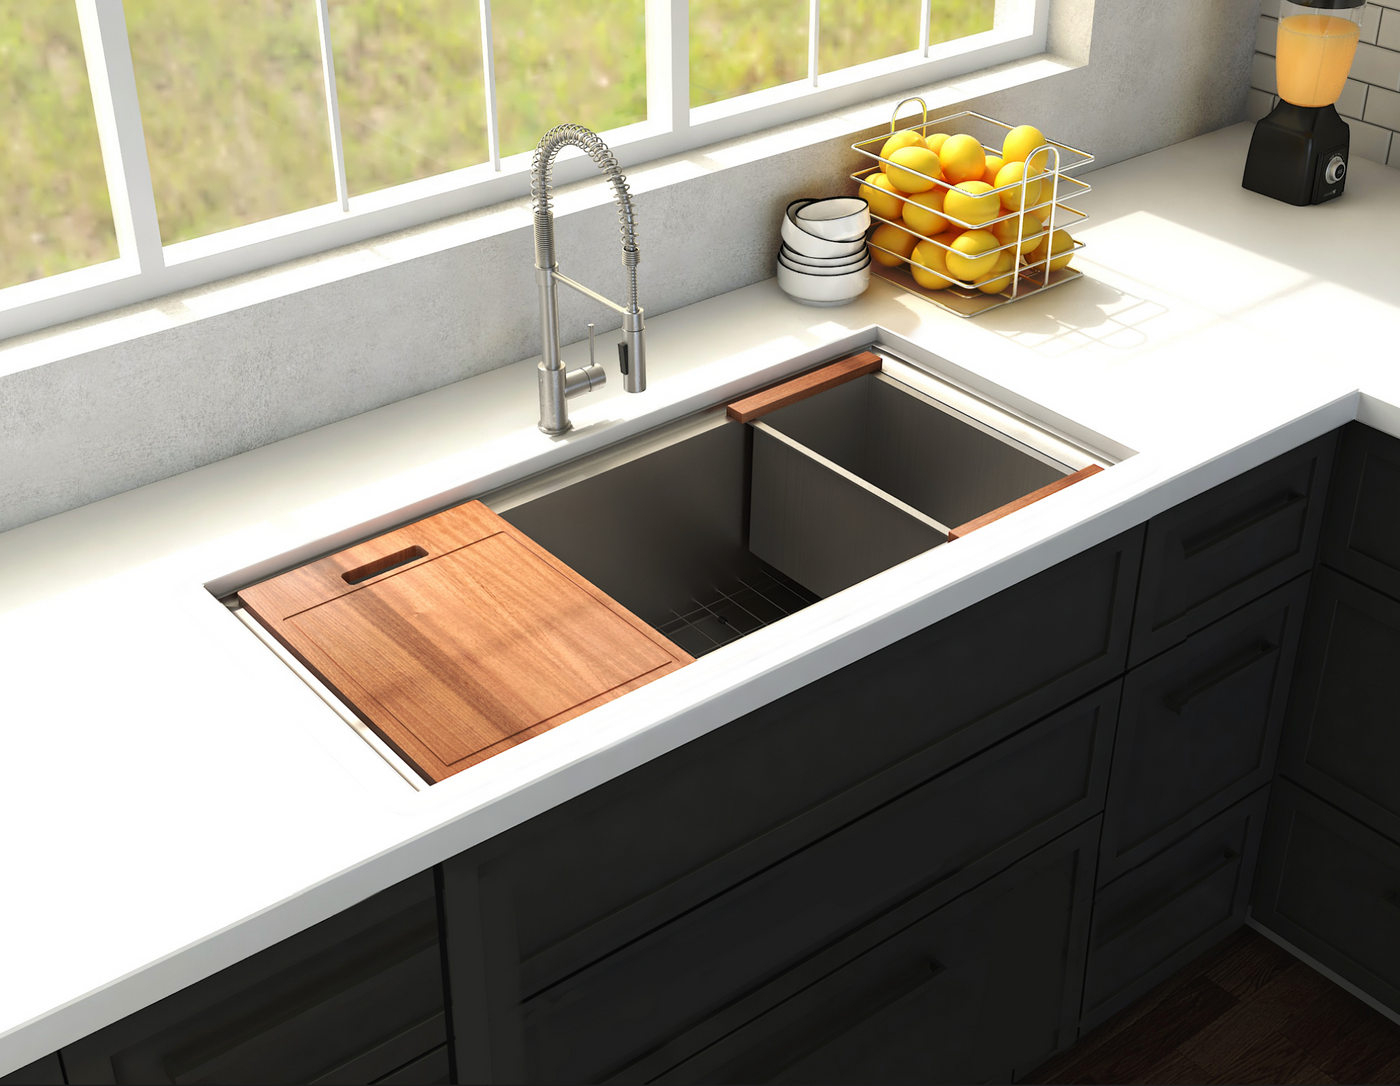 Stainless Steel Sink Options You Should Know About